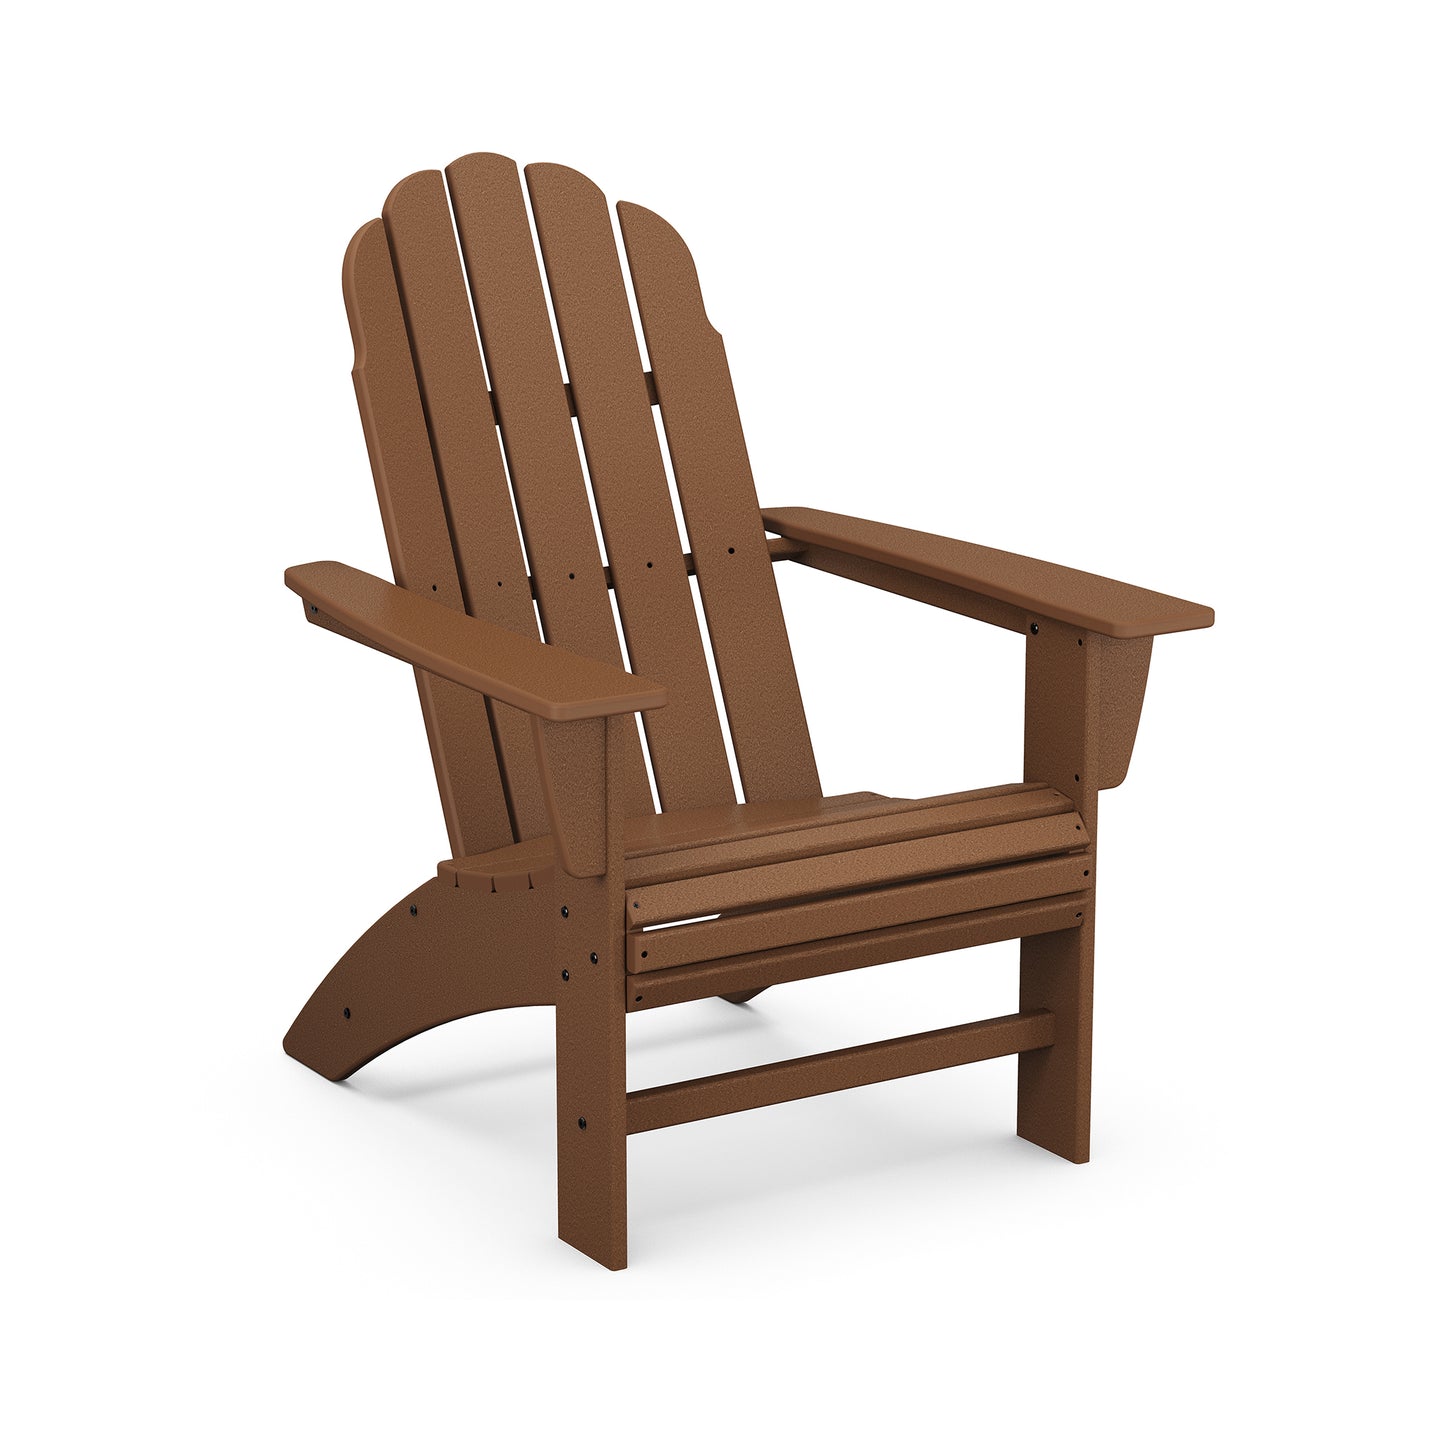 A brown POLYWOOD® Vineyard Curveback Adirondack chair made of plastic, featuring a slatted back and seat design, stands isolated on a white background.